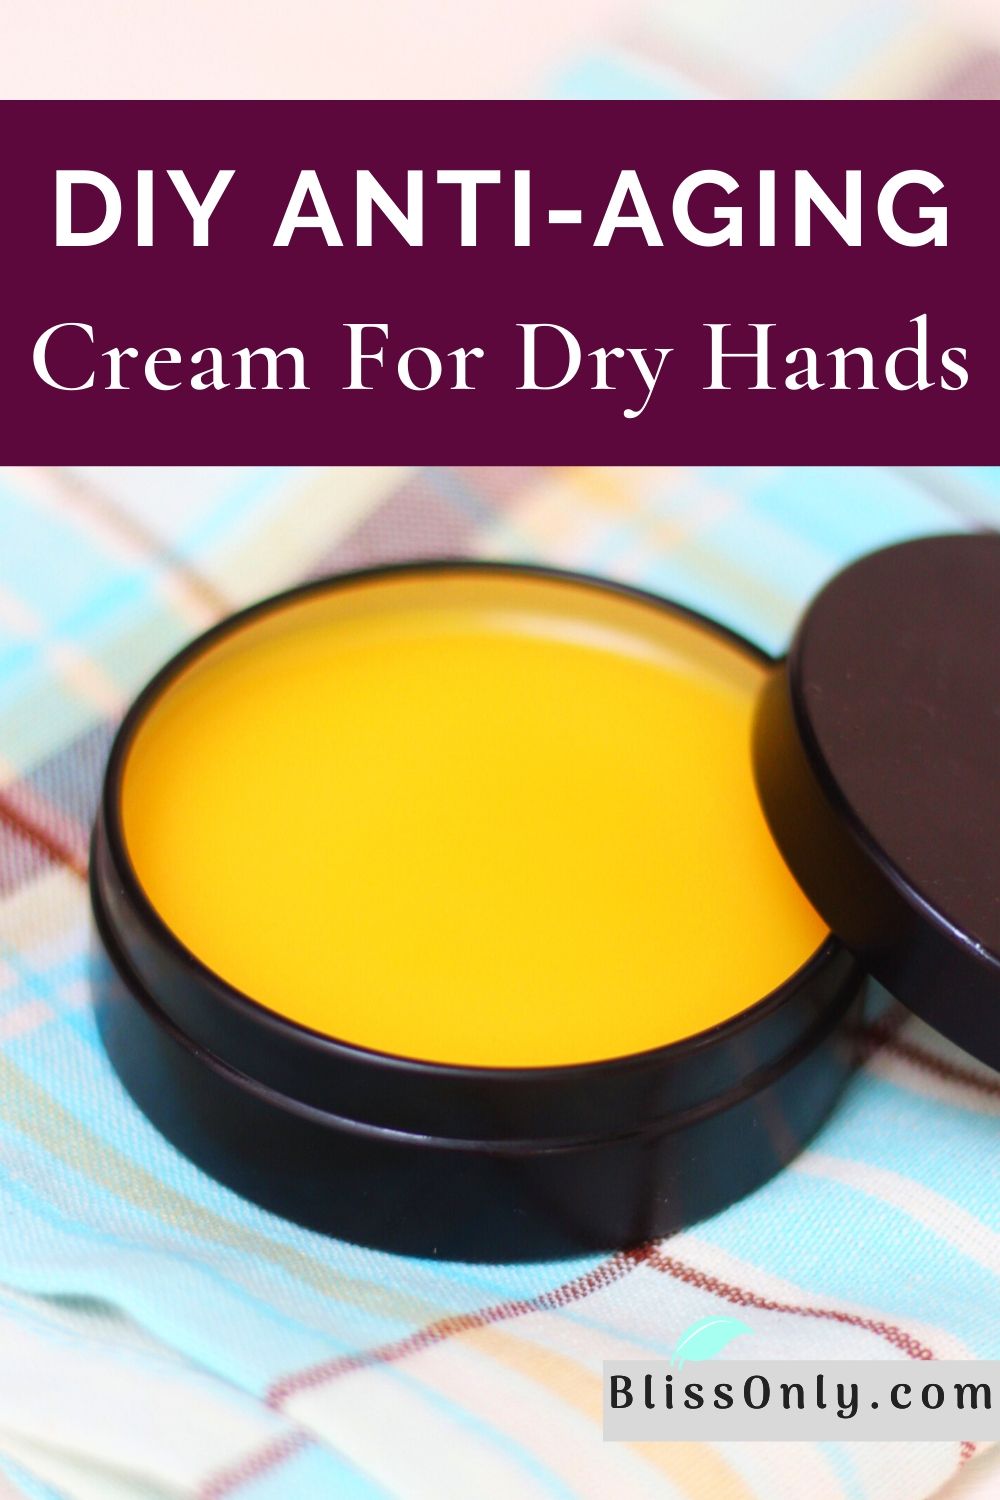 anti-aging cream for dry hands